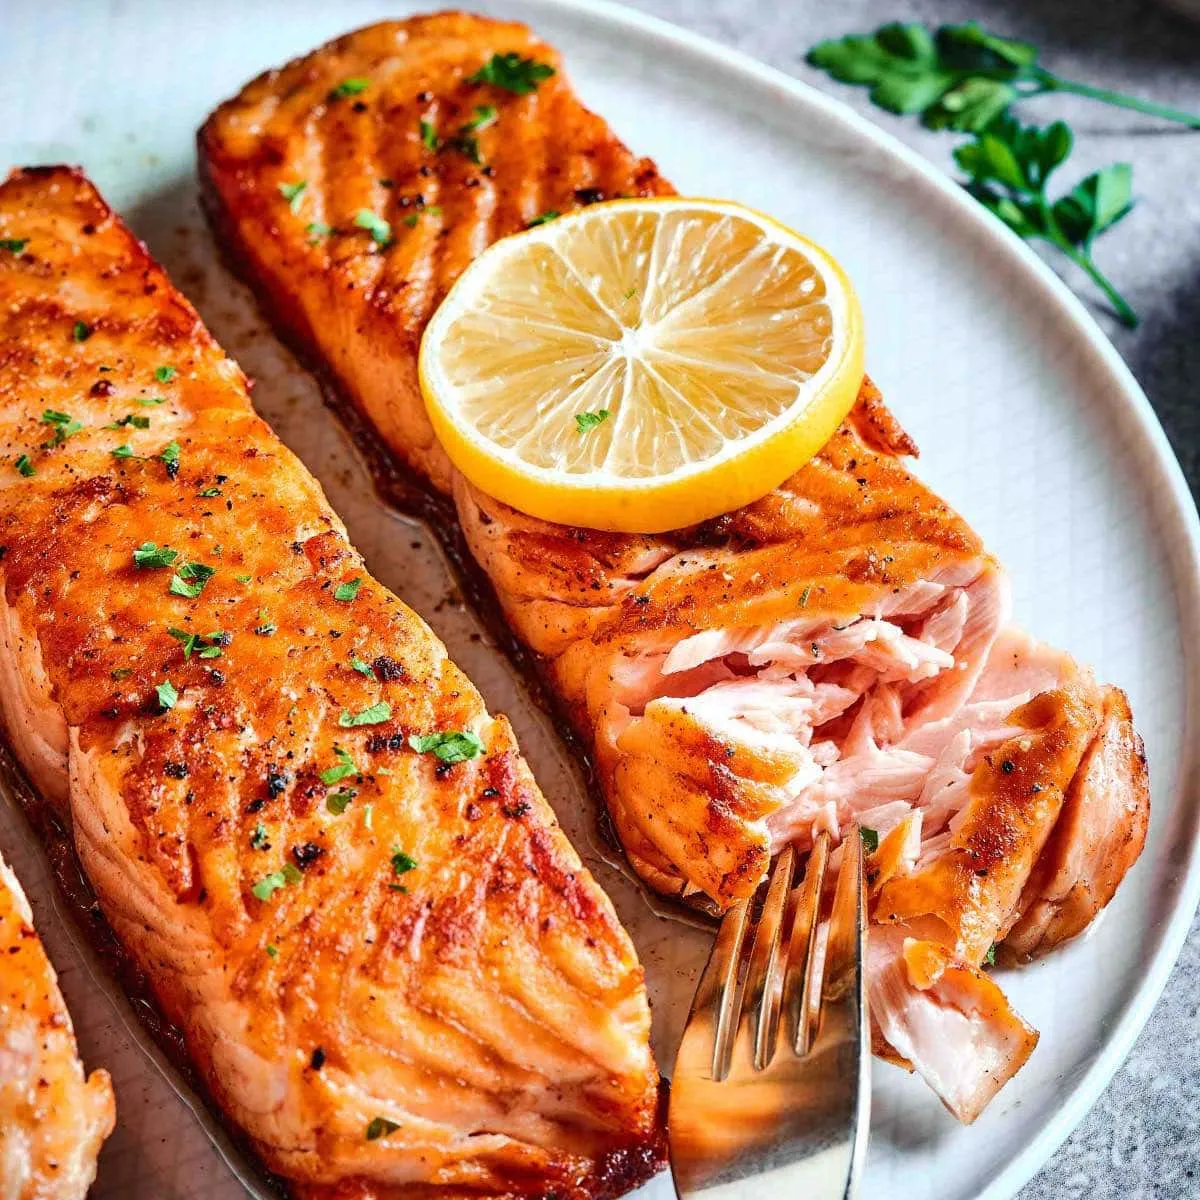 Benefits Of Salmon For Health